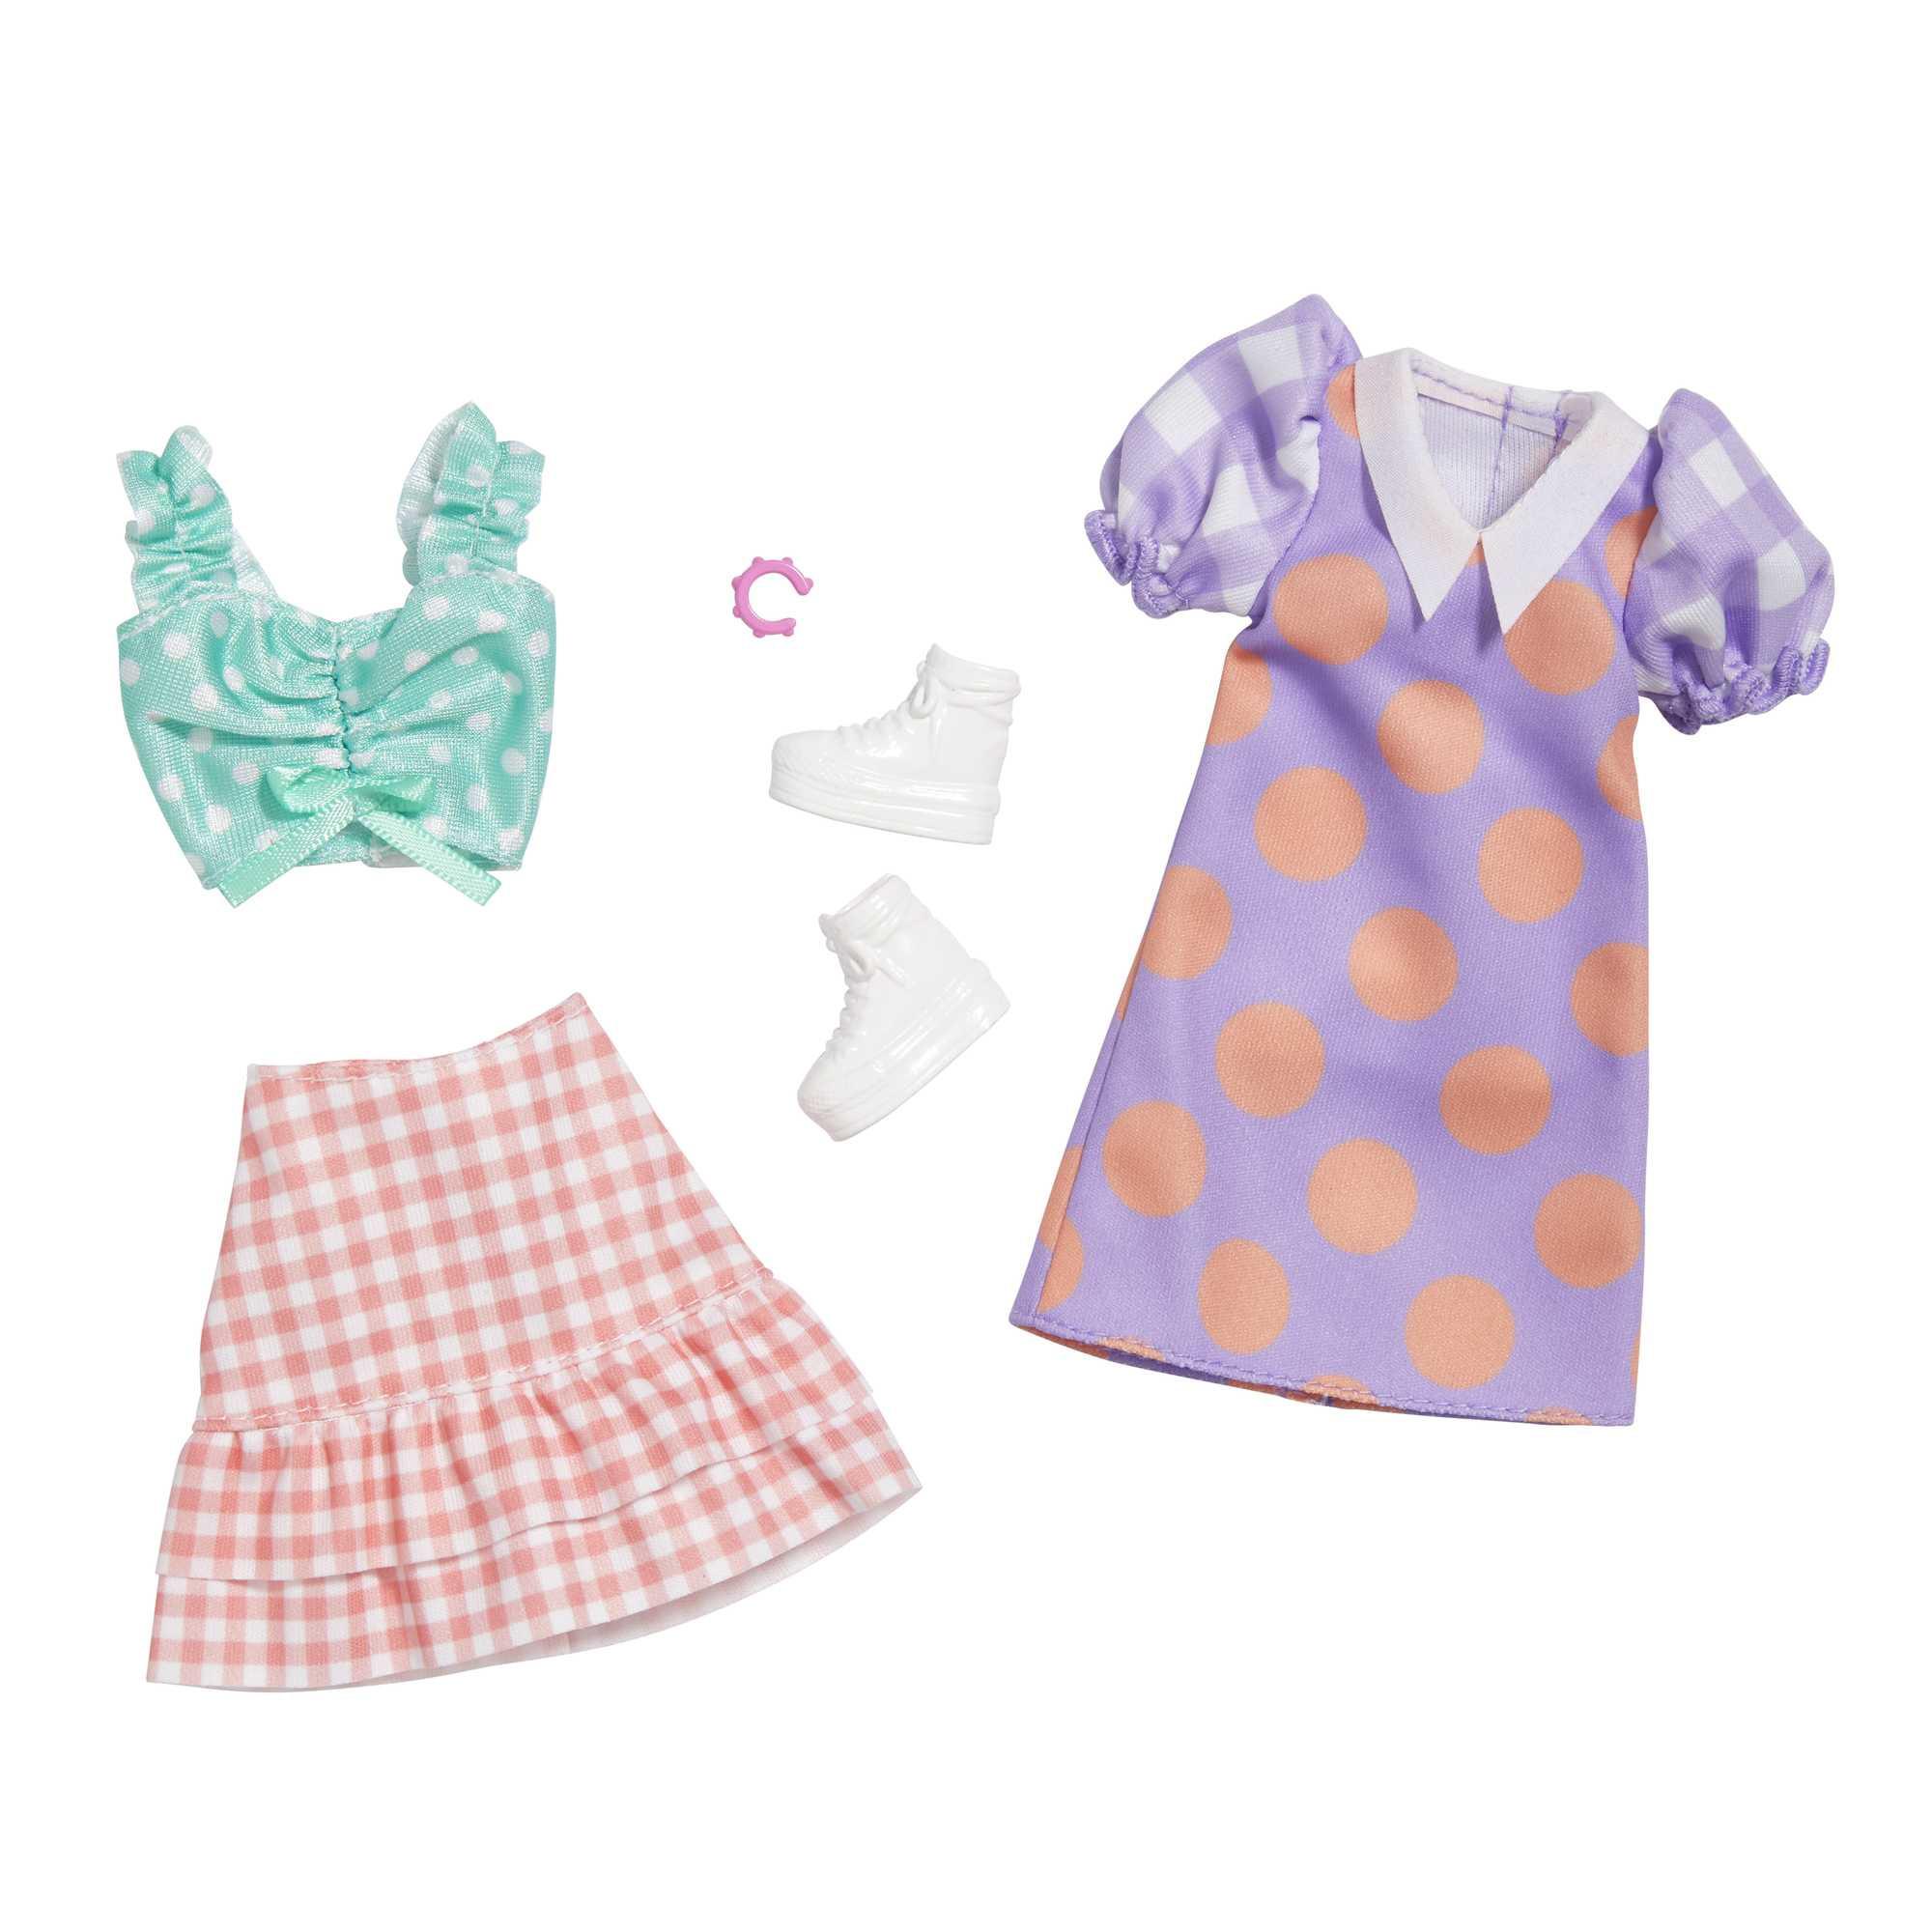 Barbie  Fashions 2er-Pack Polka-farbige Puppenkleidung 